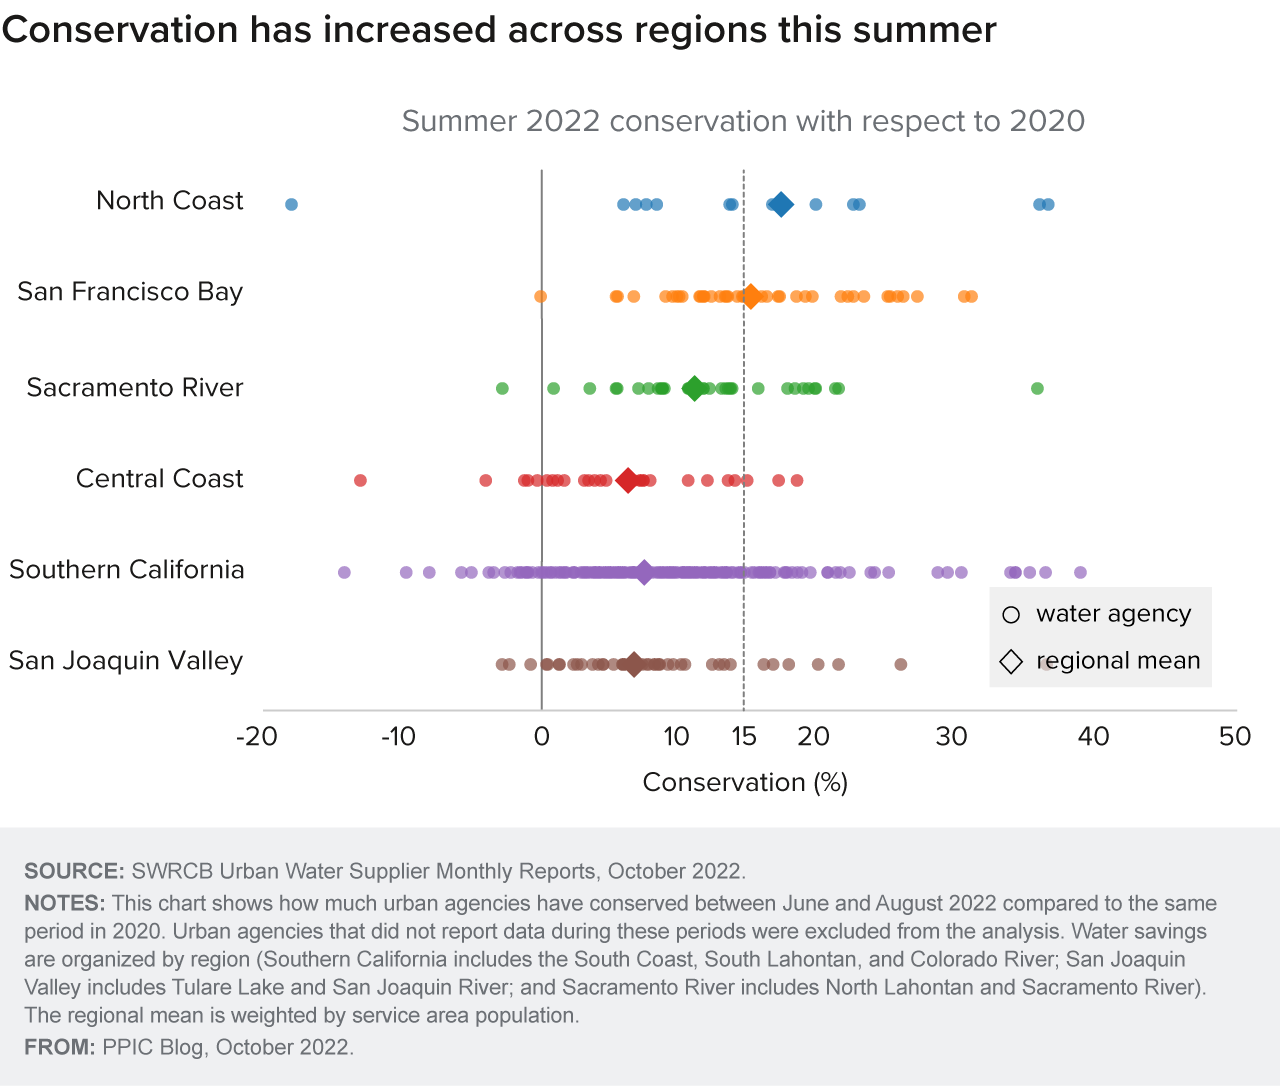 figure - Conservation has increased across regions this summer